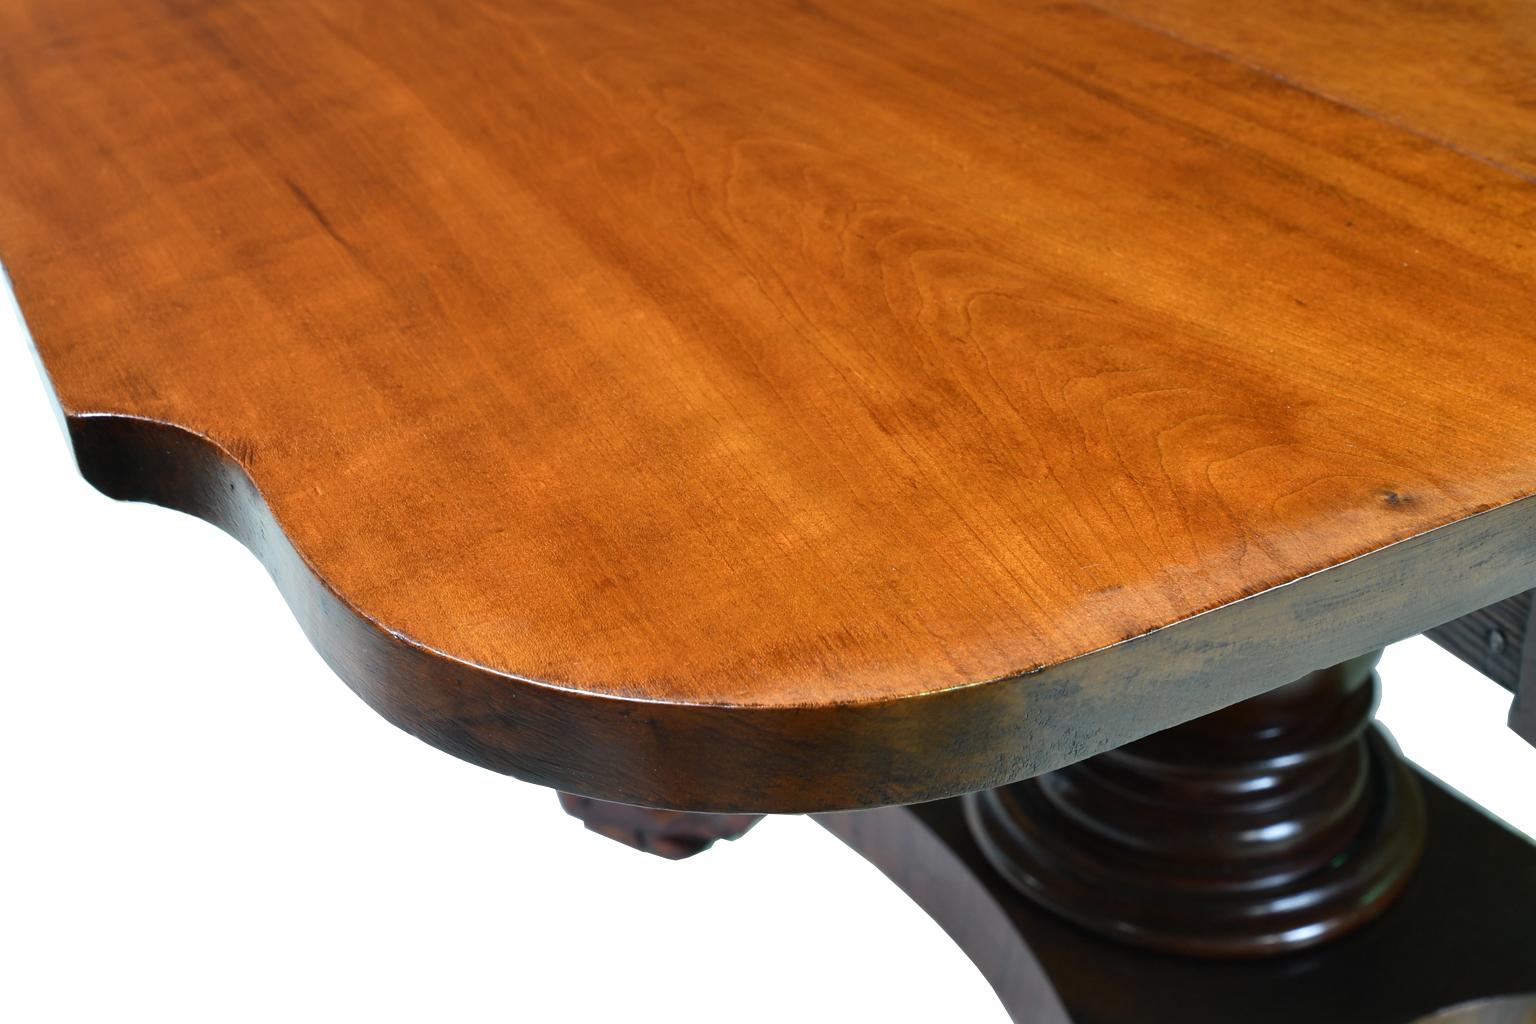 Early American Empire Drop-Leaf/ Pembroke Table in West Indies Mahogany, c. 1830 For Sale 9